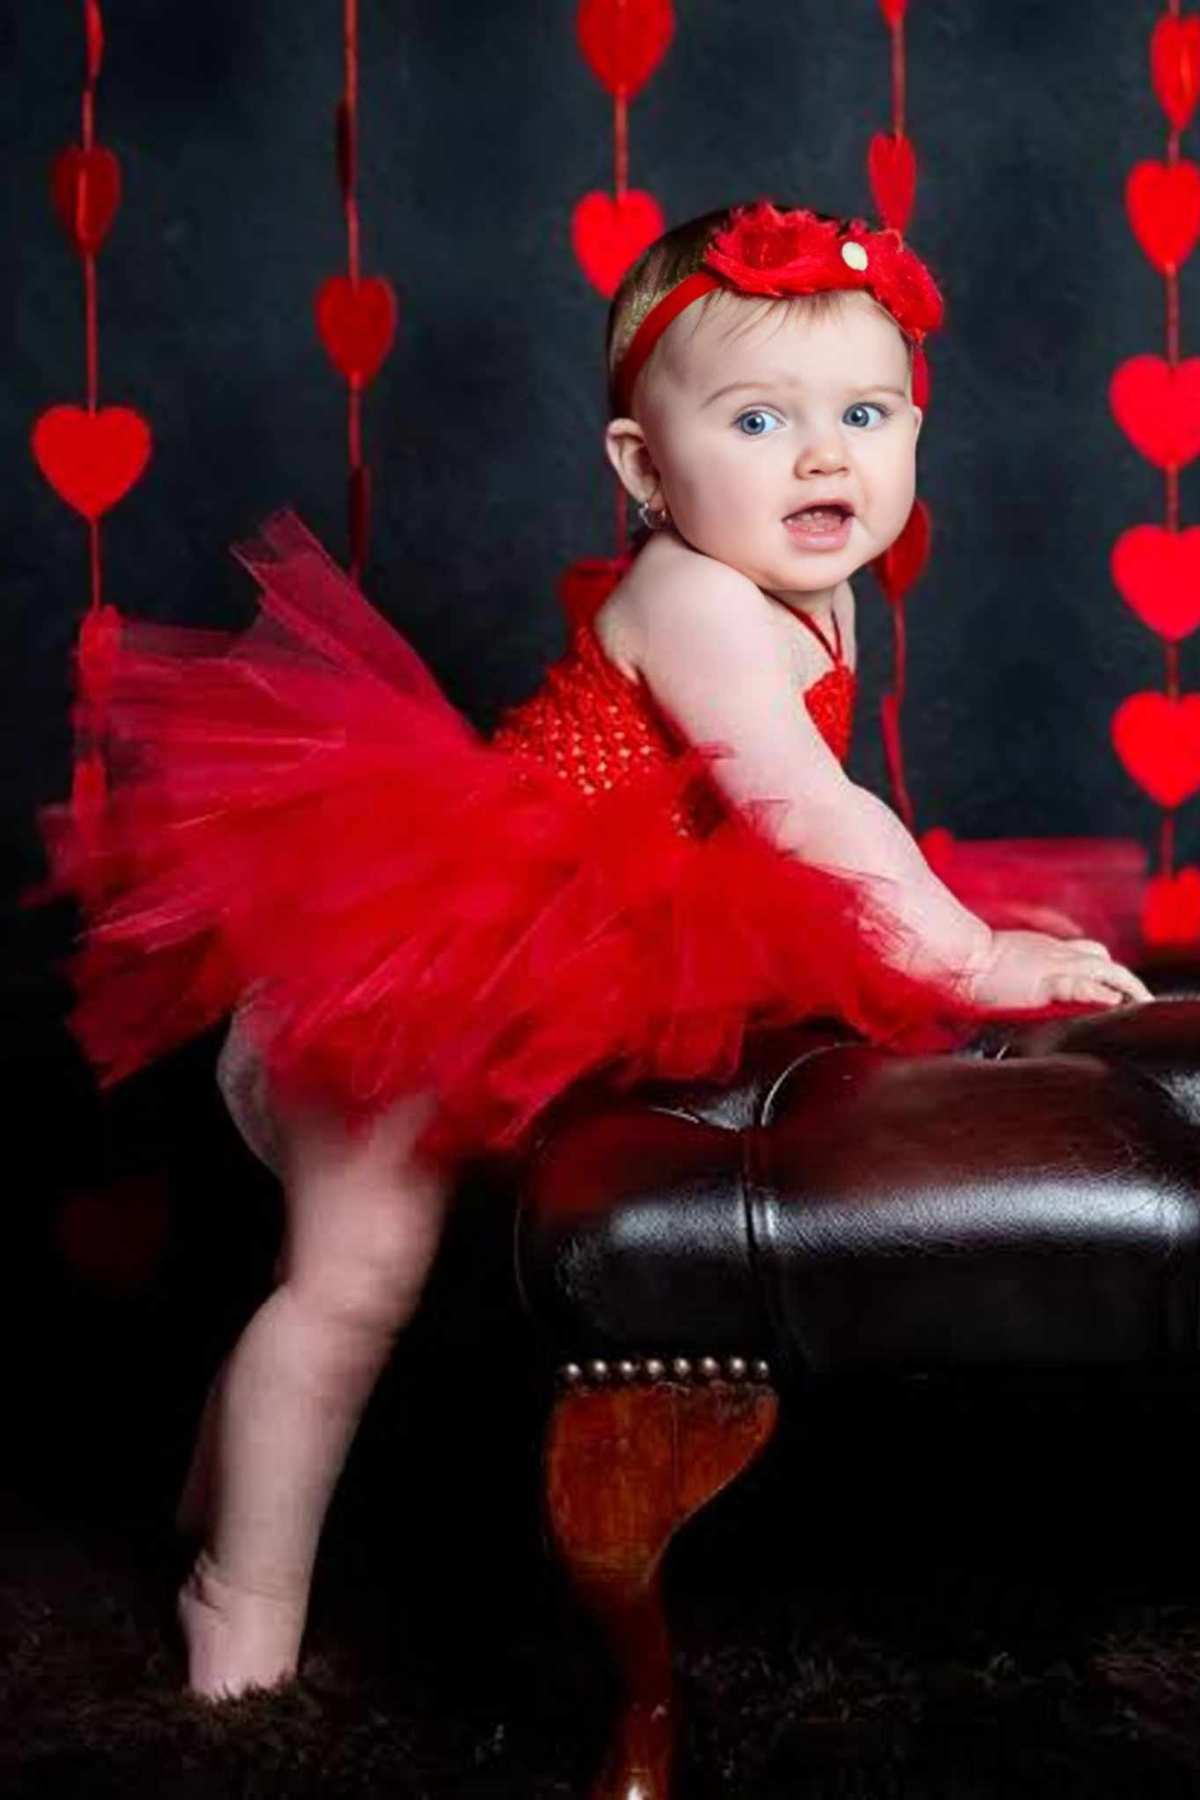 A baby girl in a red tutu standing on a leather chair.